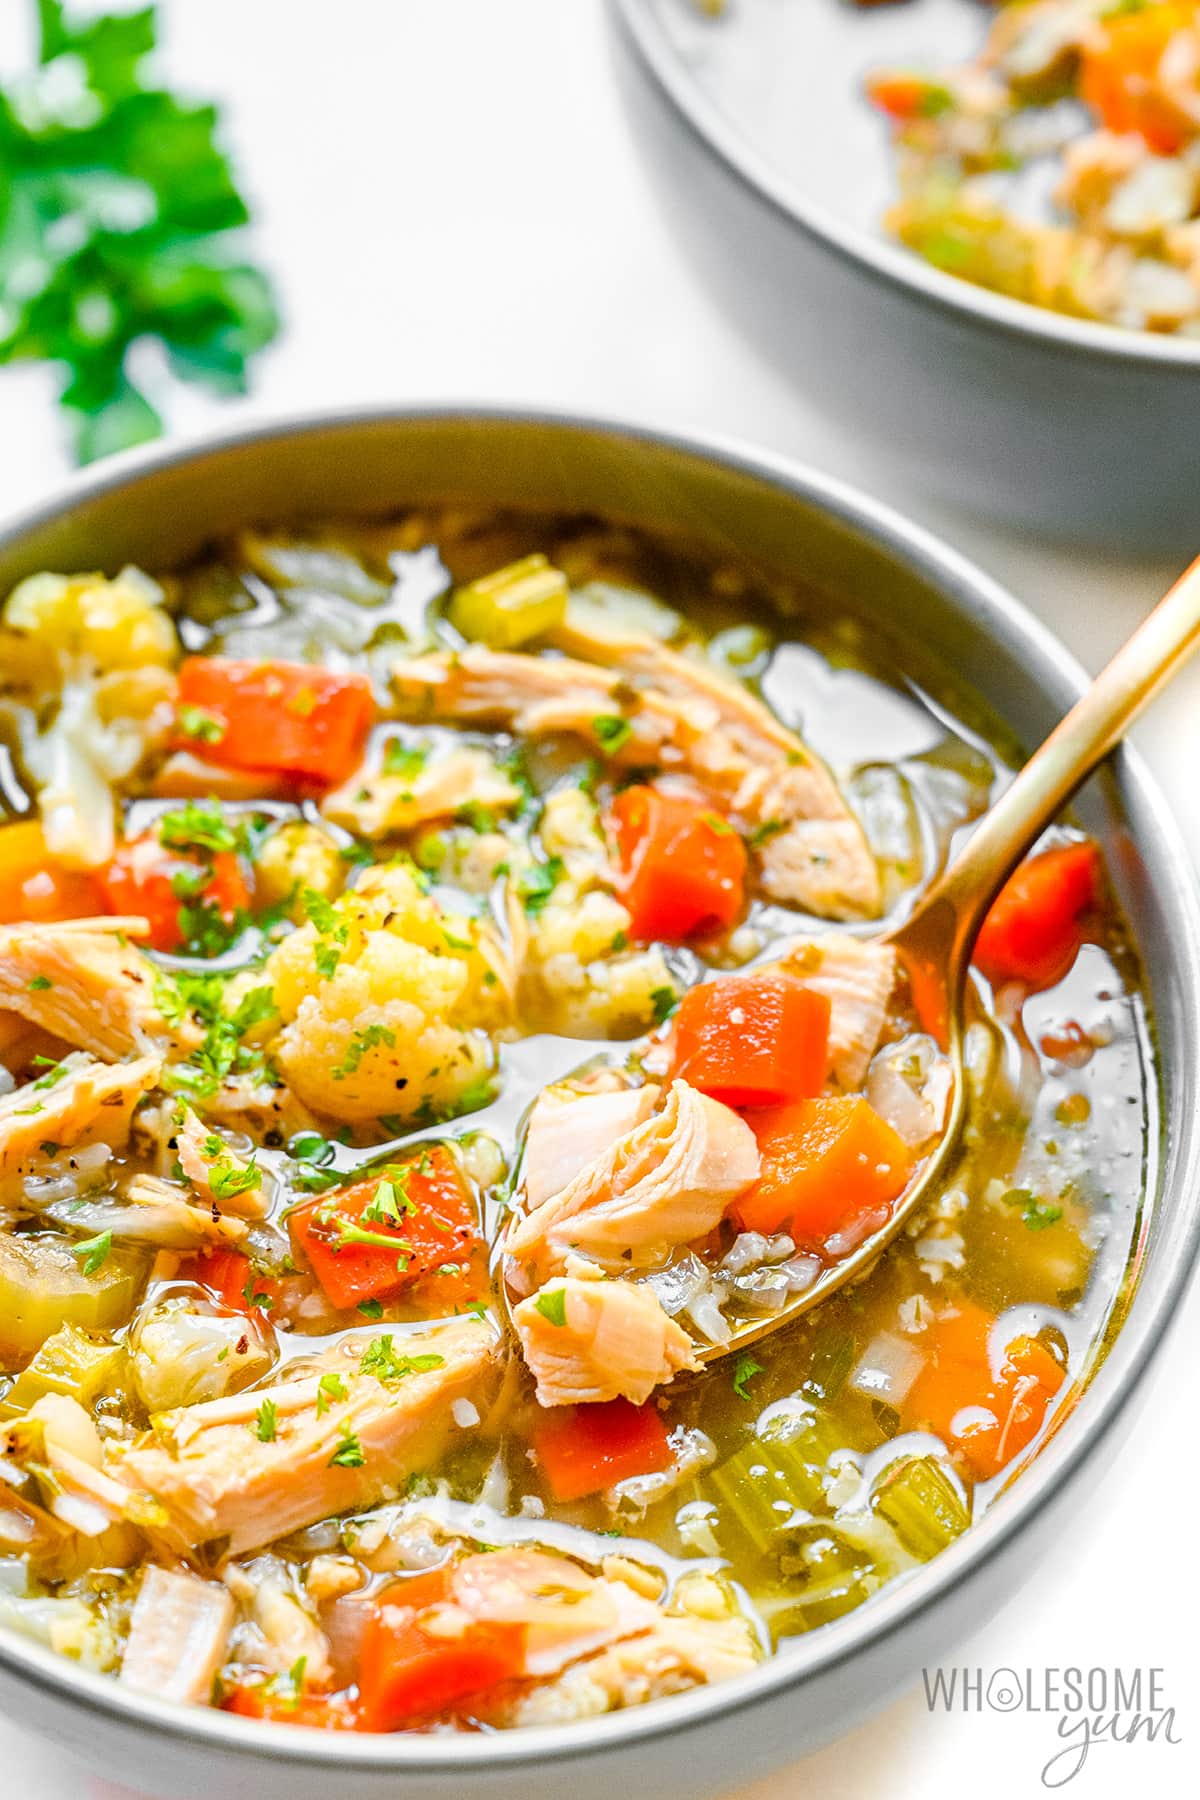 This bowl of turkey soup is one of the best things to do with leftover turkey.